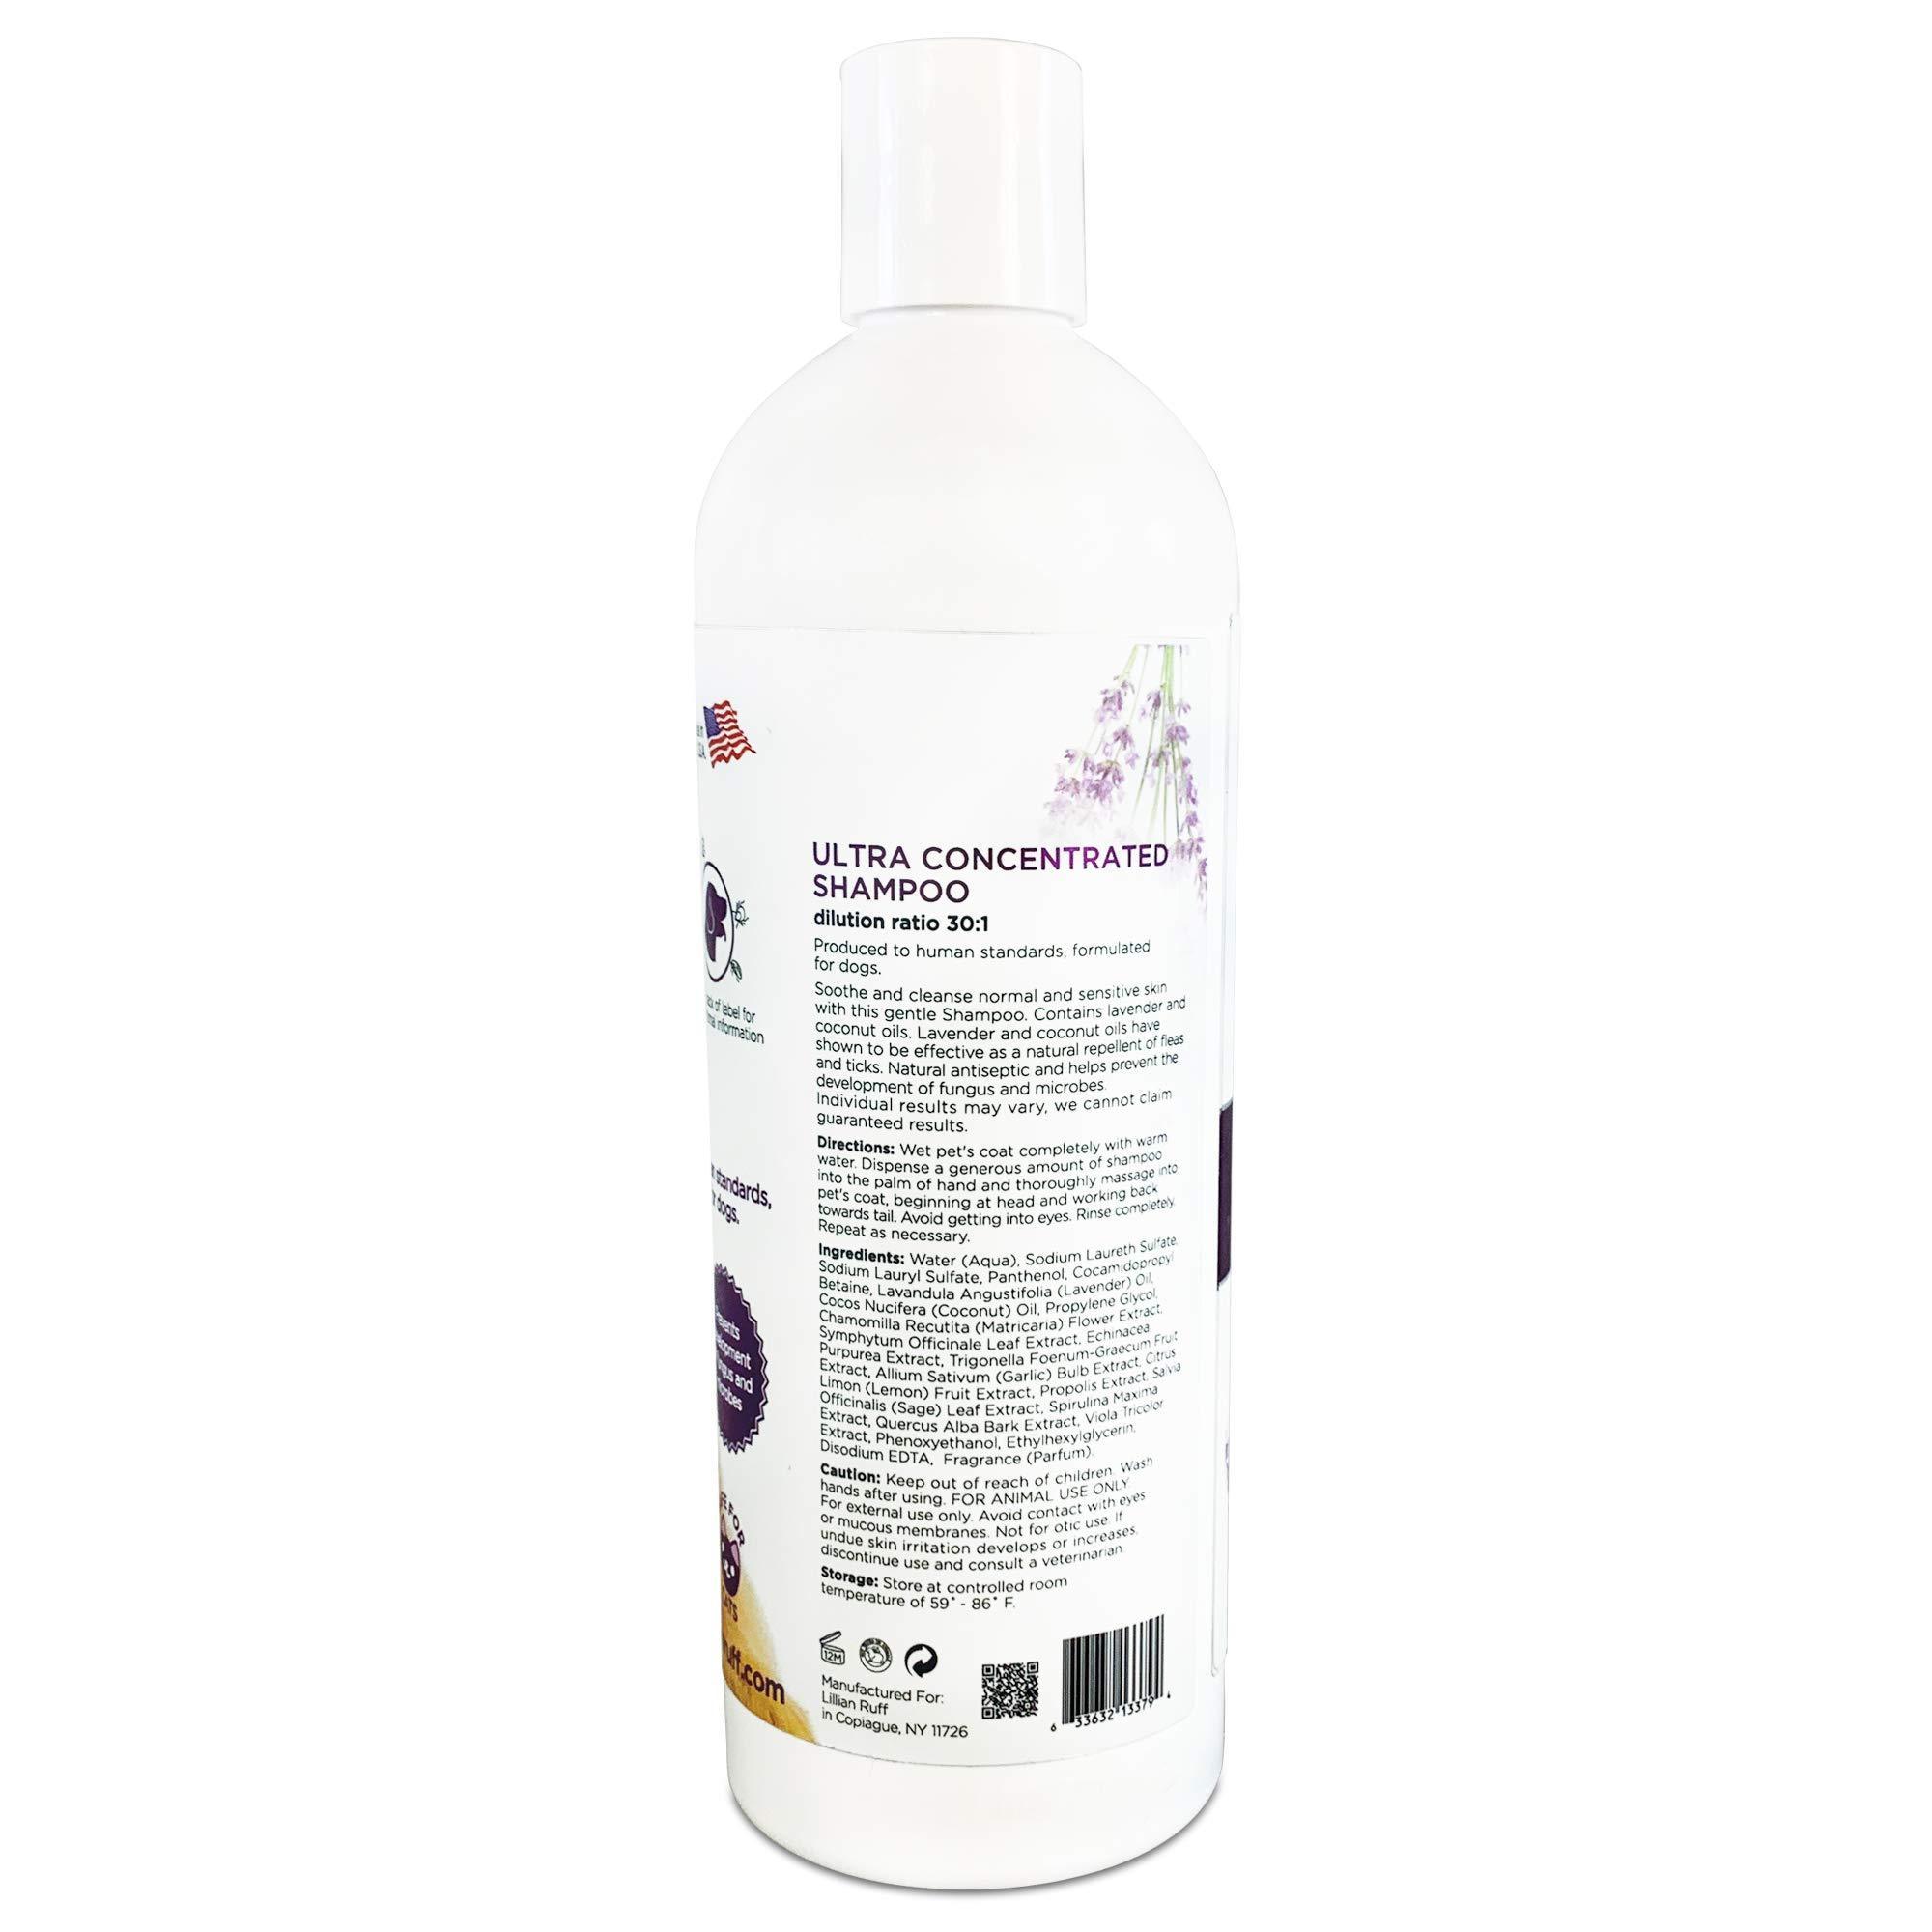 Ultra Concentrated Shampoo (16oz With Brush) - Lillian Ruff-LR-CONCENTRATED-16-BATHBRUSH